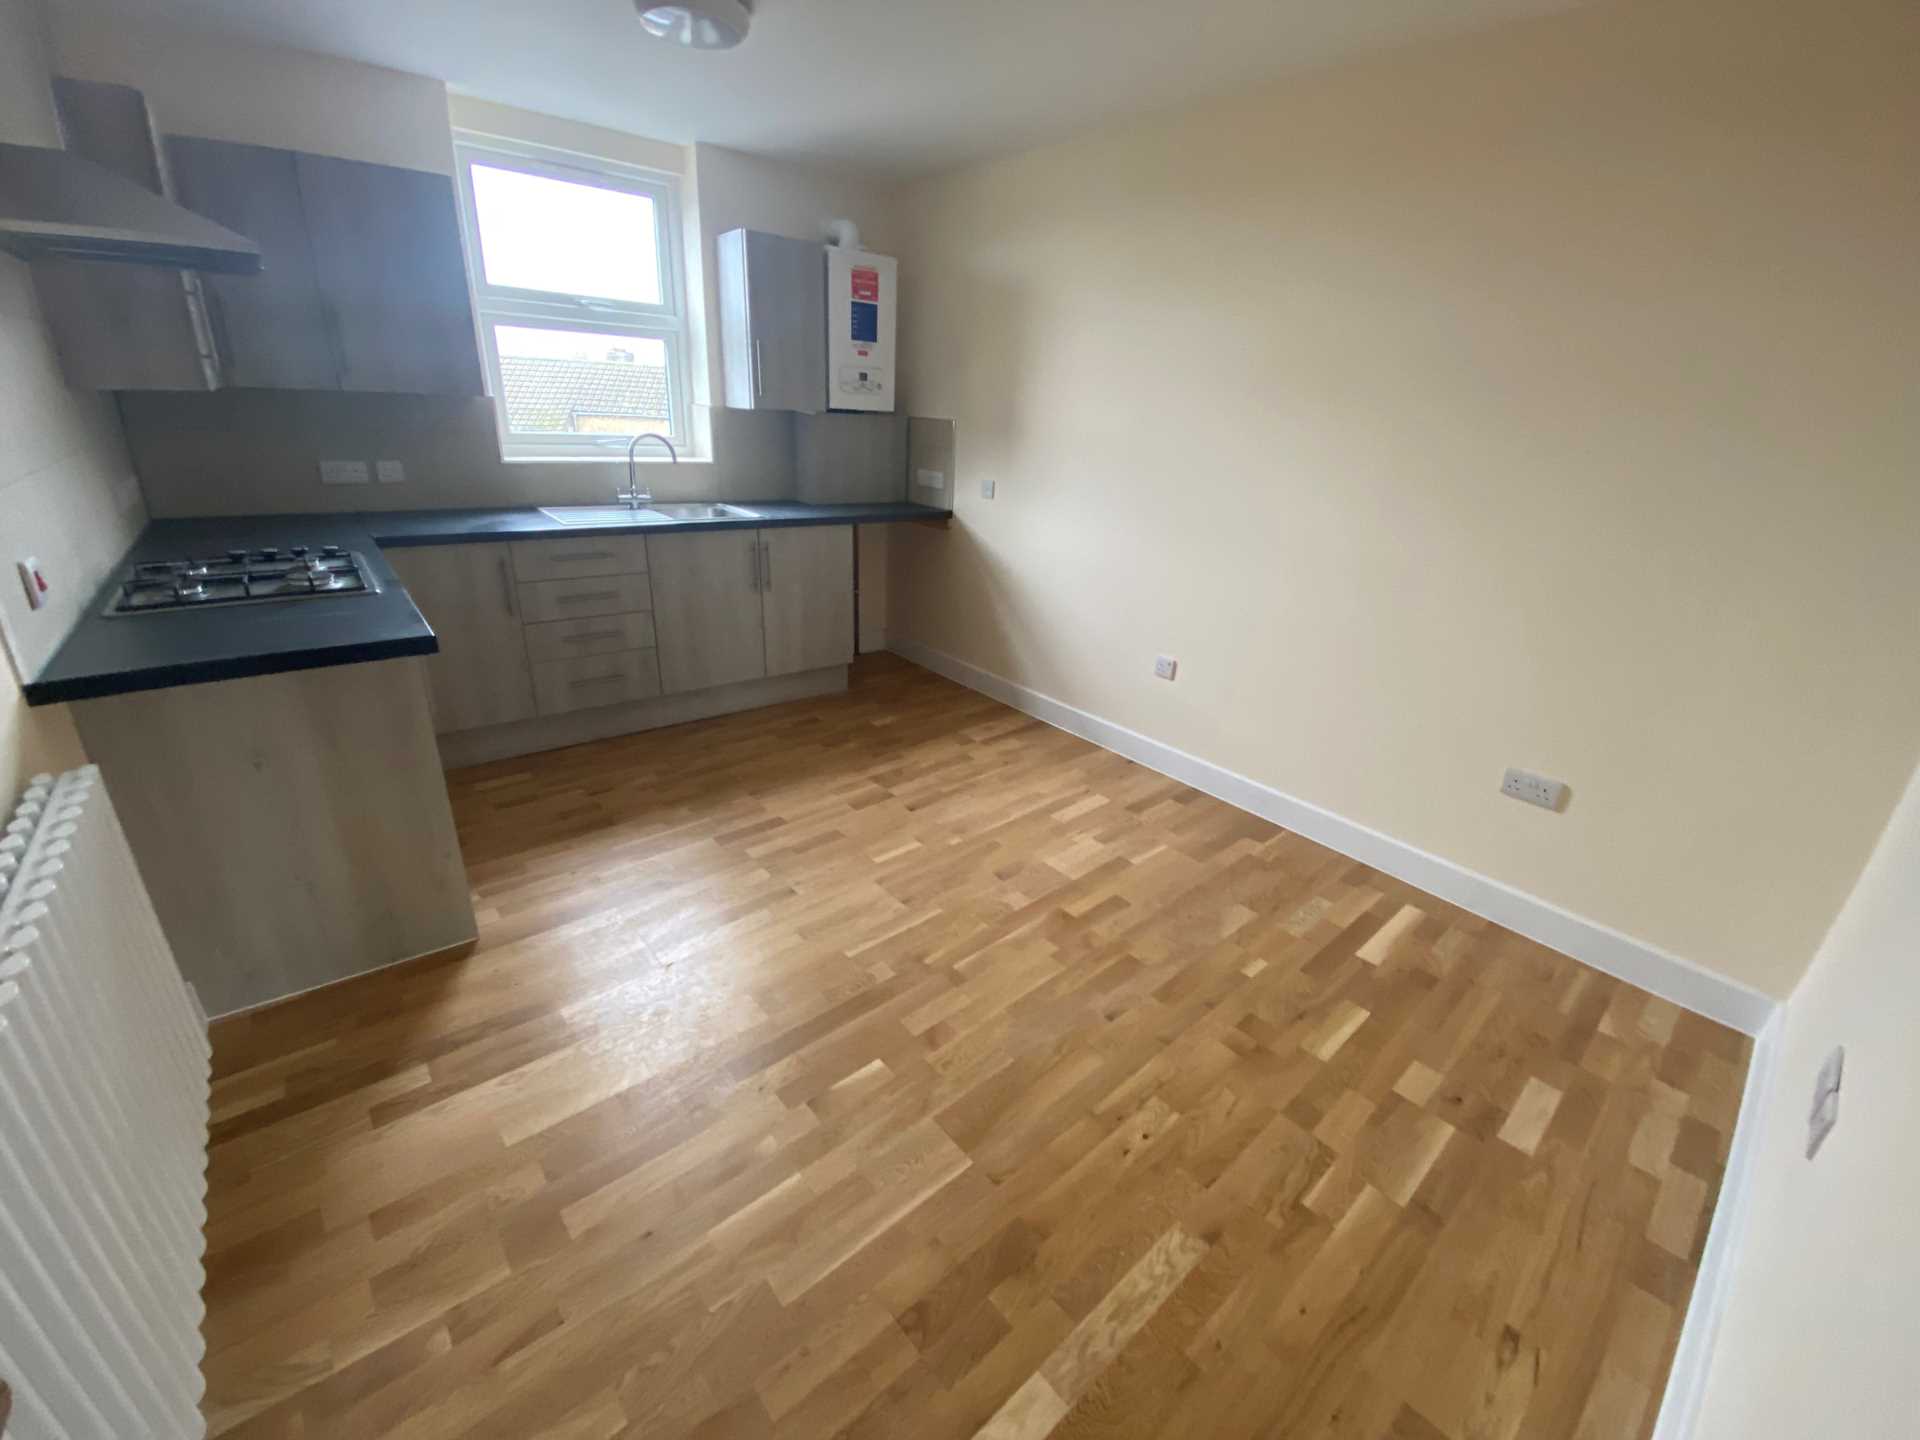 2 bed Flat for rent in London. From Belvoir - Stratford